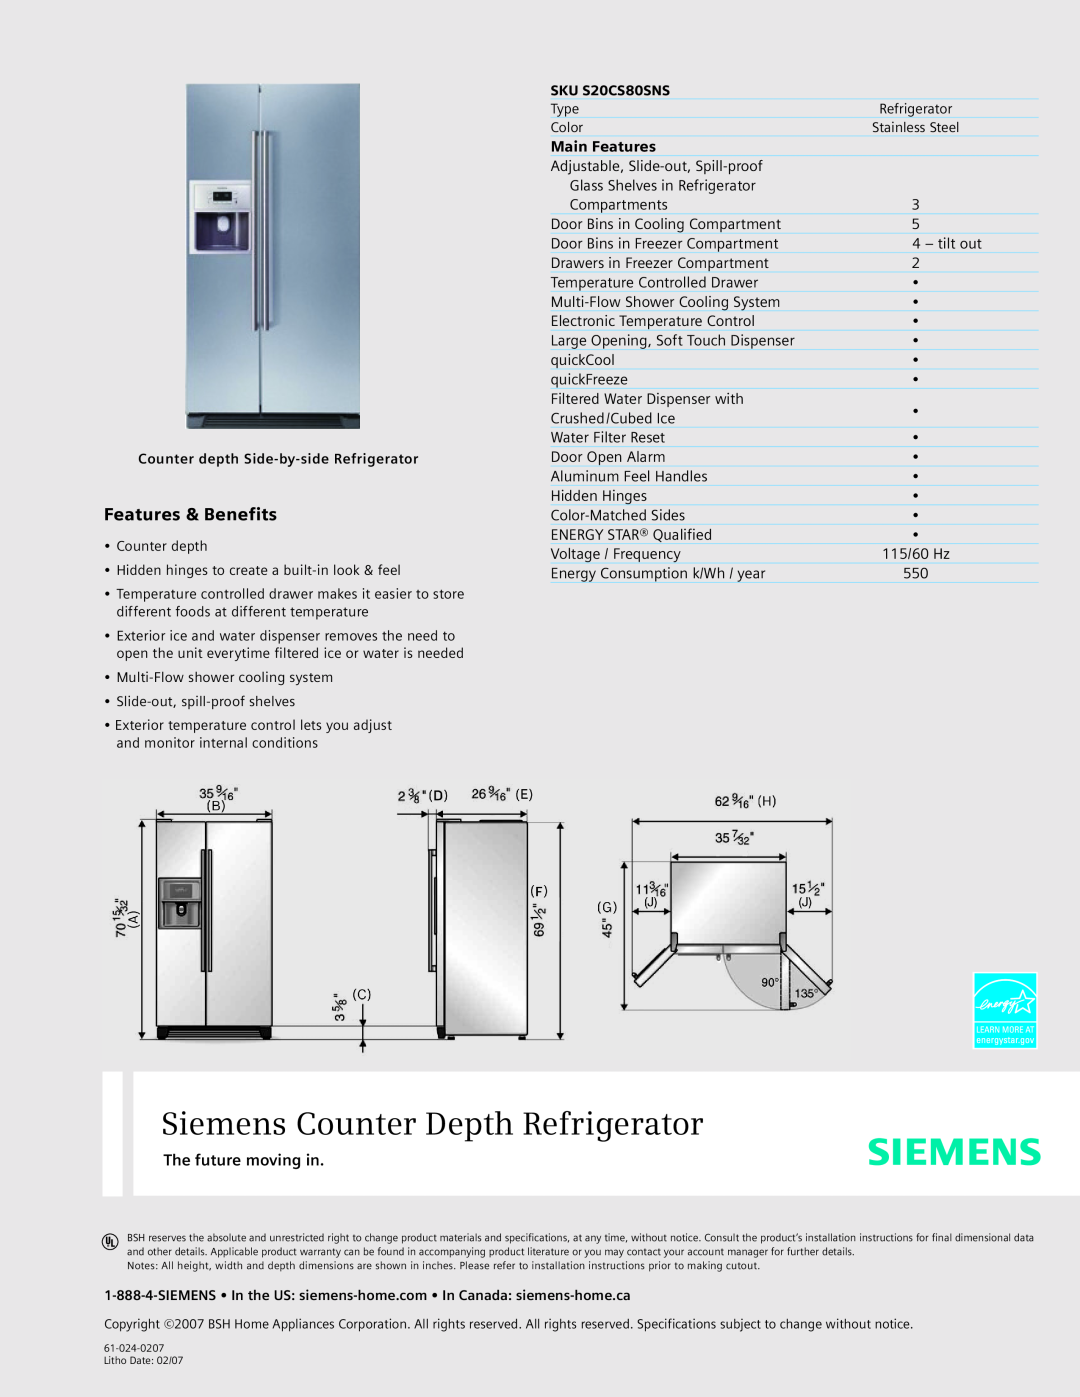 Siemens SKU S20CS80SNS specifications Siemens Counter Depth Refrigerator, Features & Benefits, The future moving in 